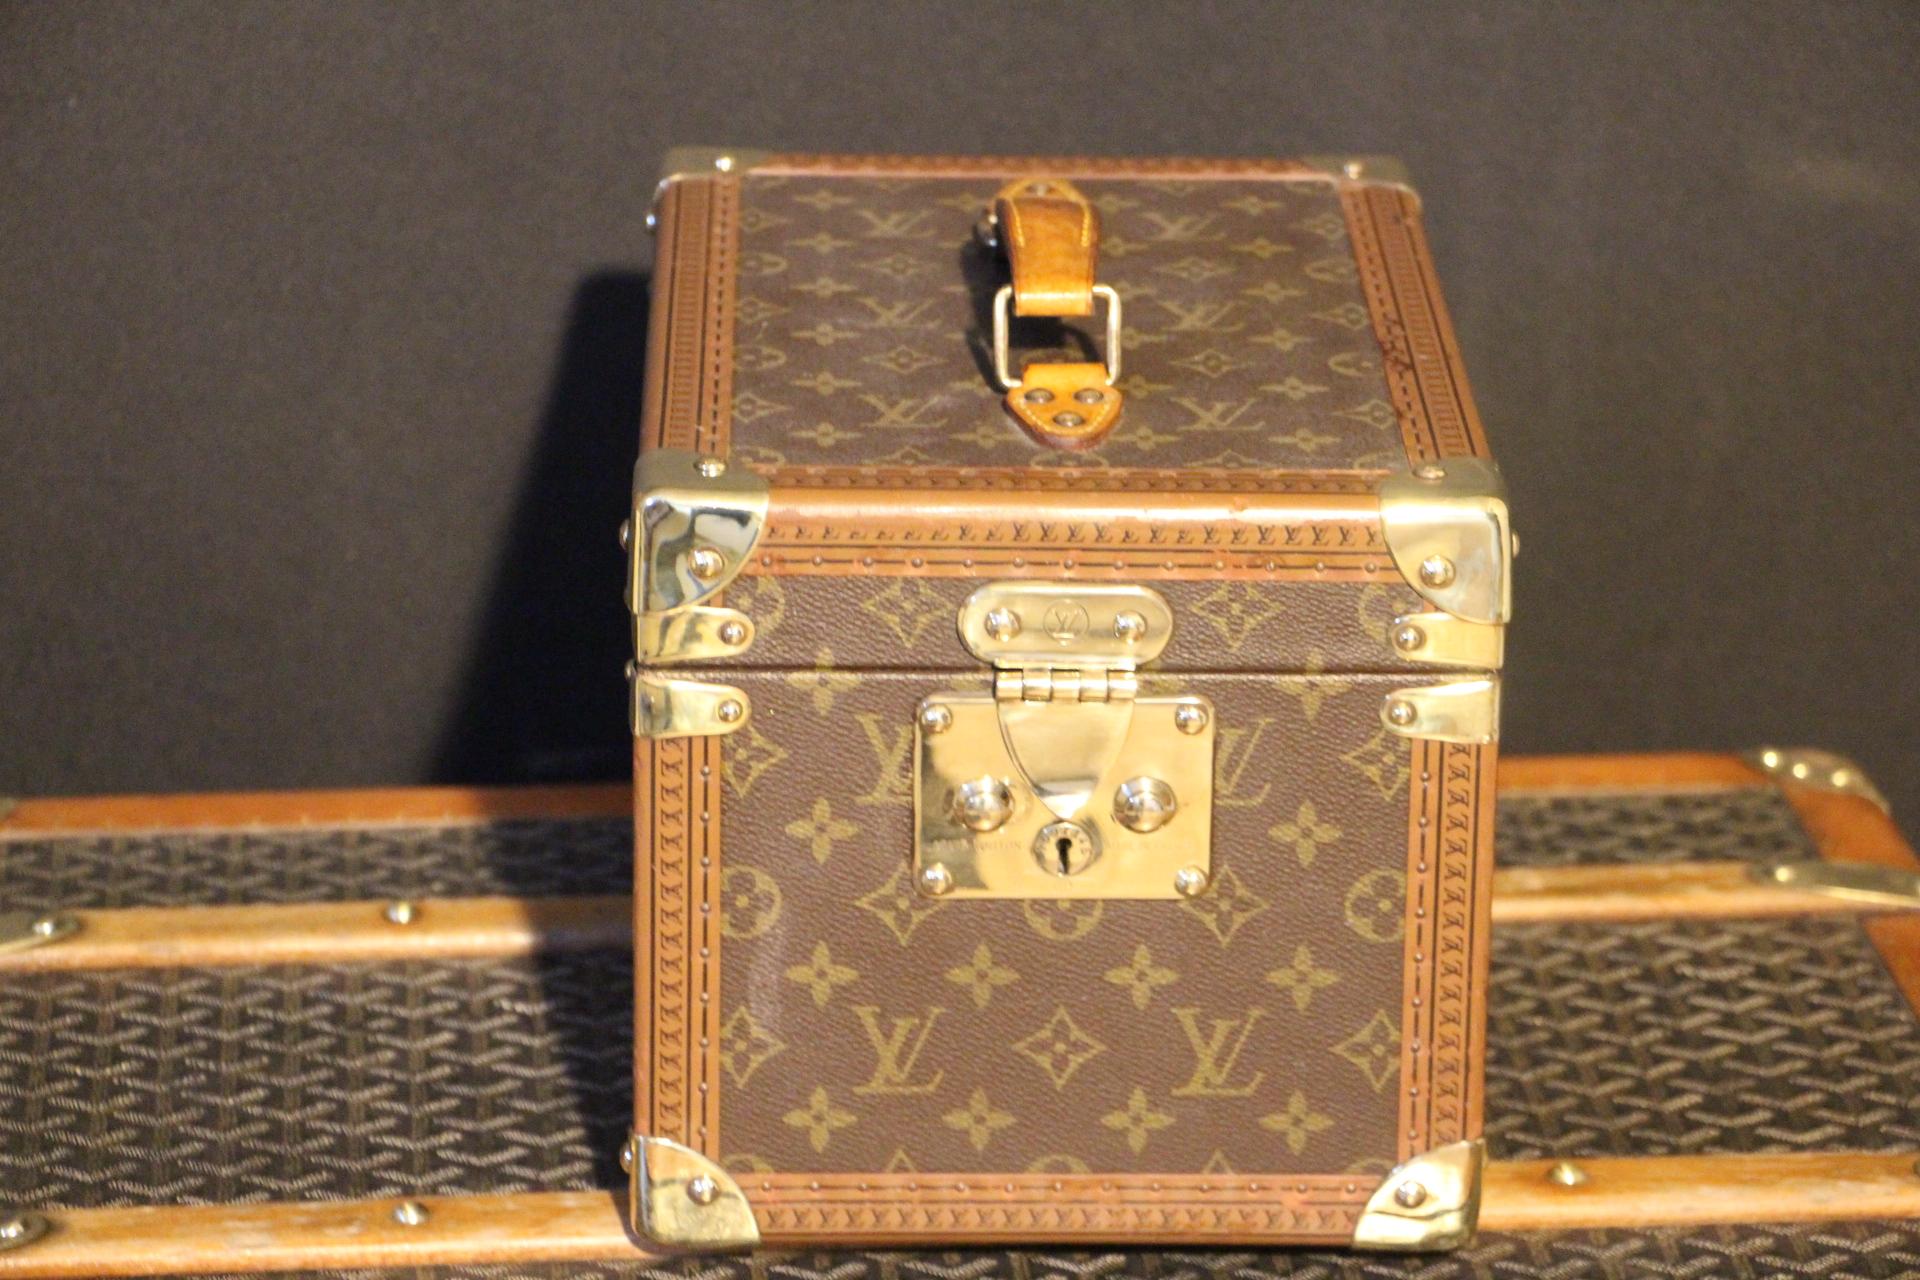 Very nice Louis Vuitton monogram train case with solid brass corners and lock.

Leather top handle.

All its studs are engraved Louis Vuitton.

Its interior is in very good condition. 

1 working key.

H 8.27 in. x W 8.67 in. x D 11.82 in.
H 21 cm x